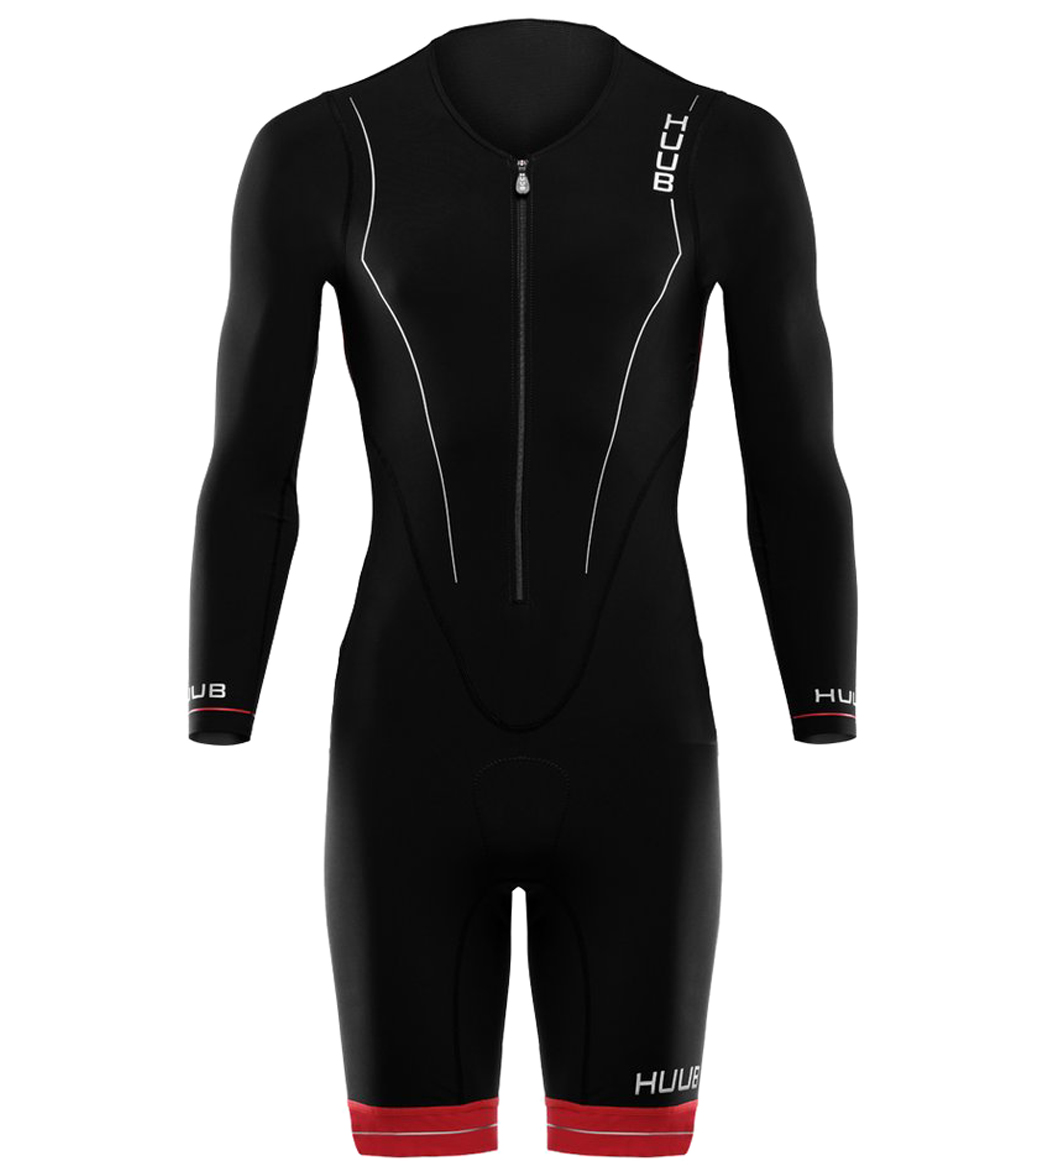 Huub Men's Race Full Sleeve Tri Suit at SwimOutlet.com - Free Shipping